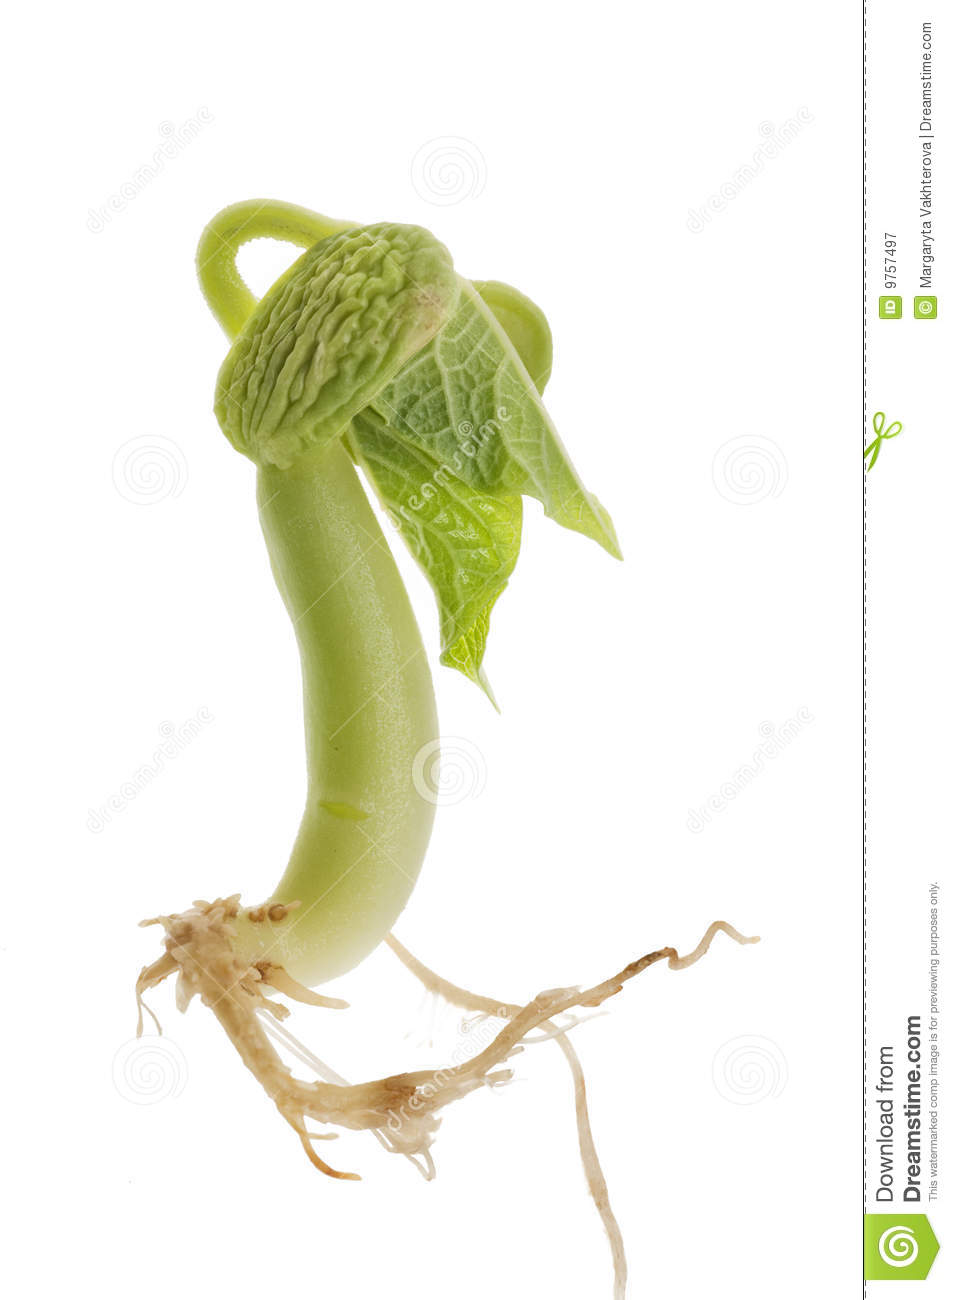 Bean Sprout Royalty Free Stock Photography   Image  9757497